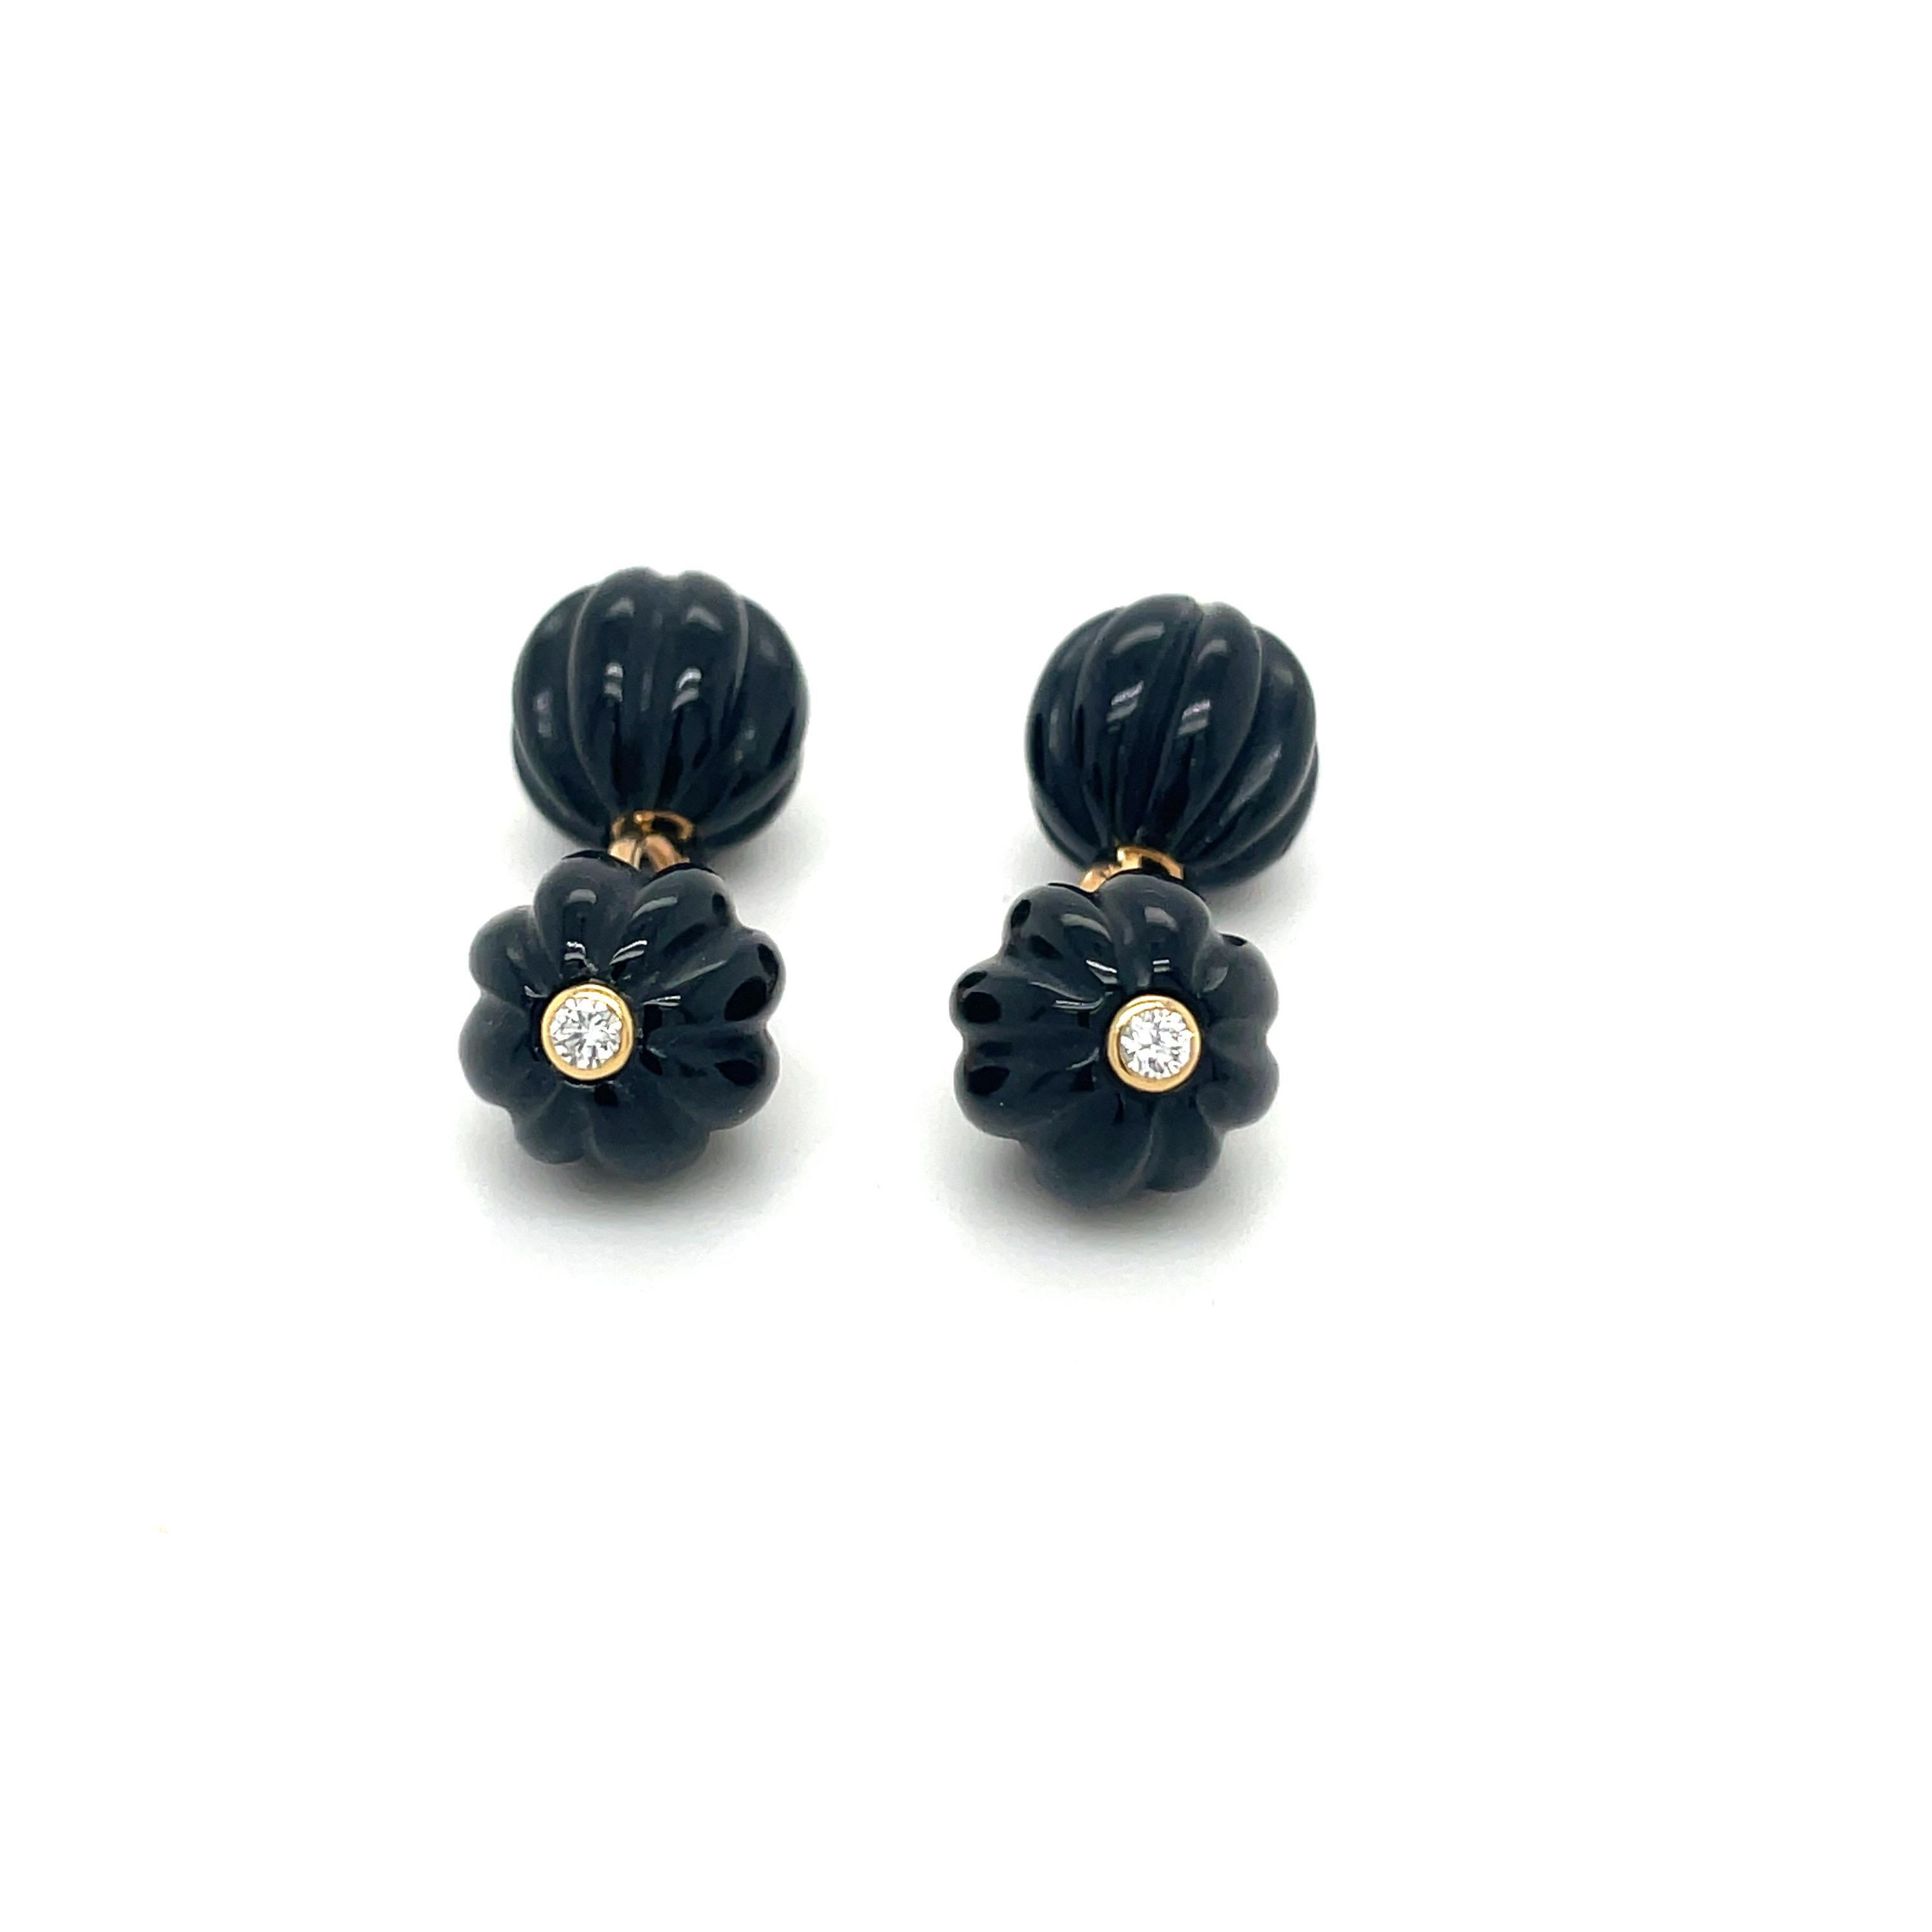 Beautiful polished black onyx fluted bead cuff links. Each center is bezel set with a round brilliant diamond. The stones are held together with a 14 karat gold link chain.
Stamped 14k